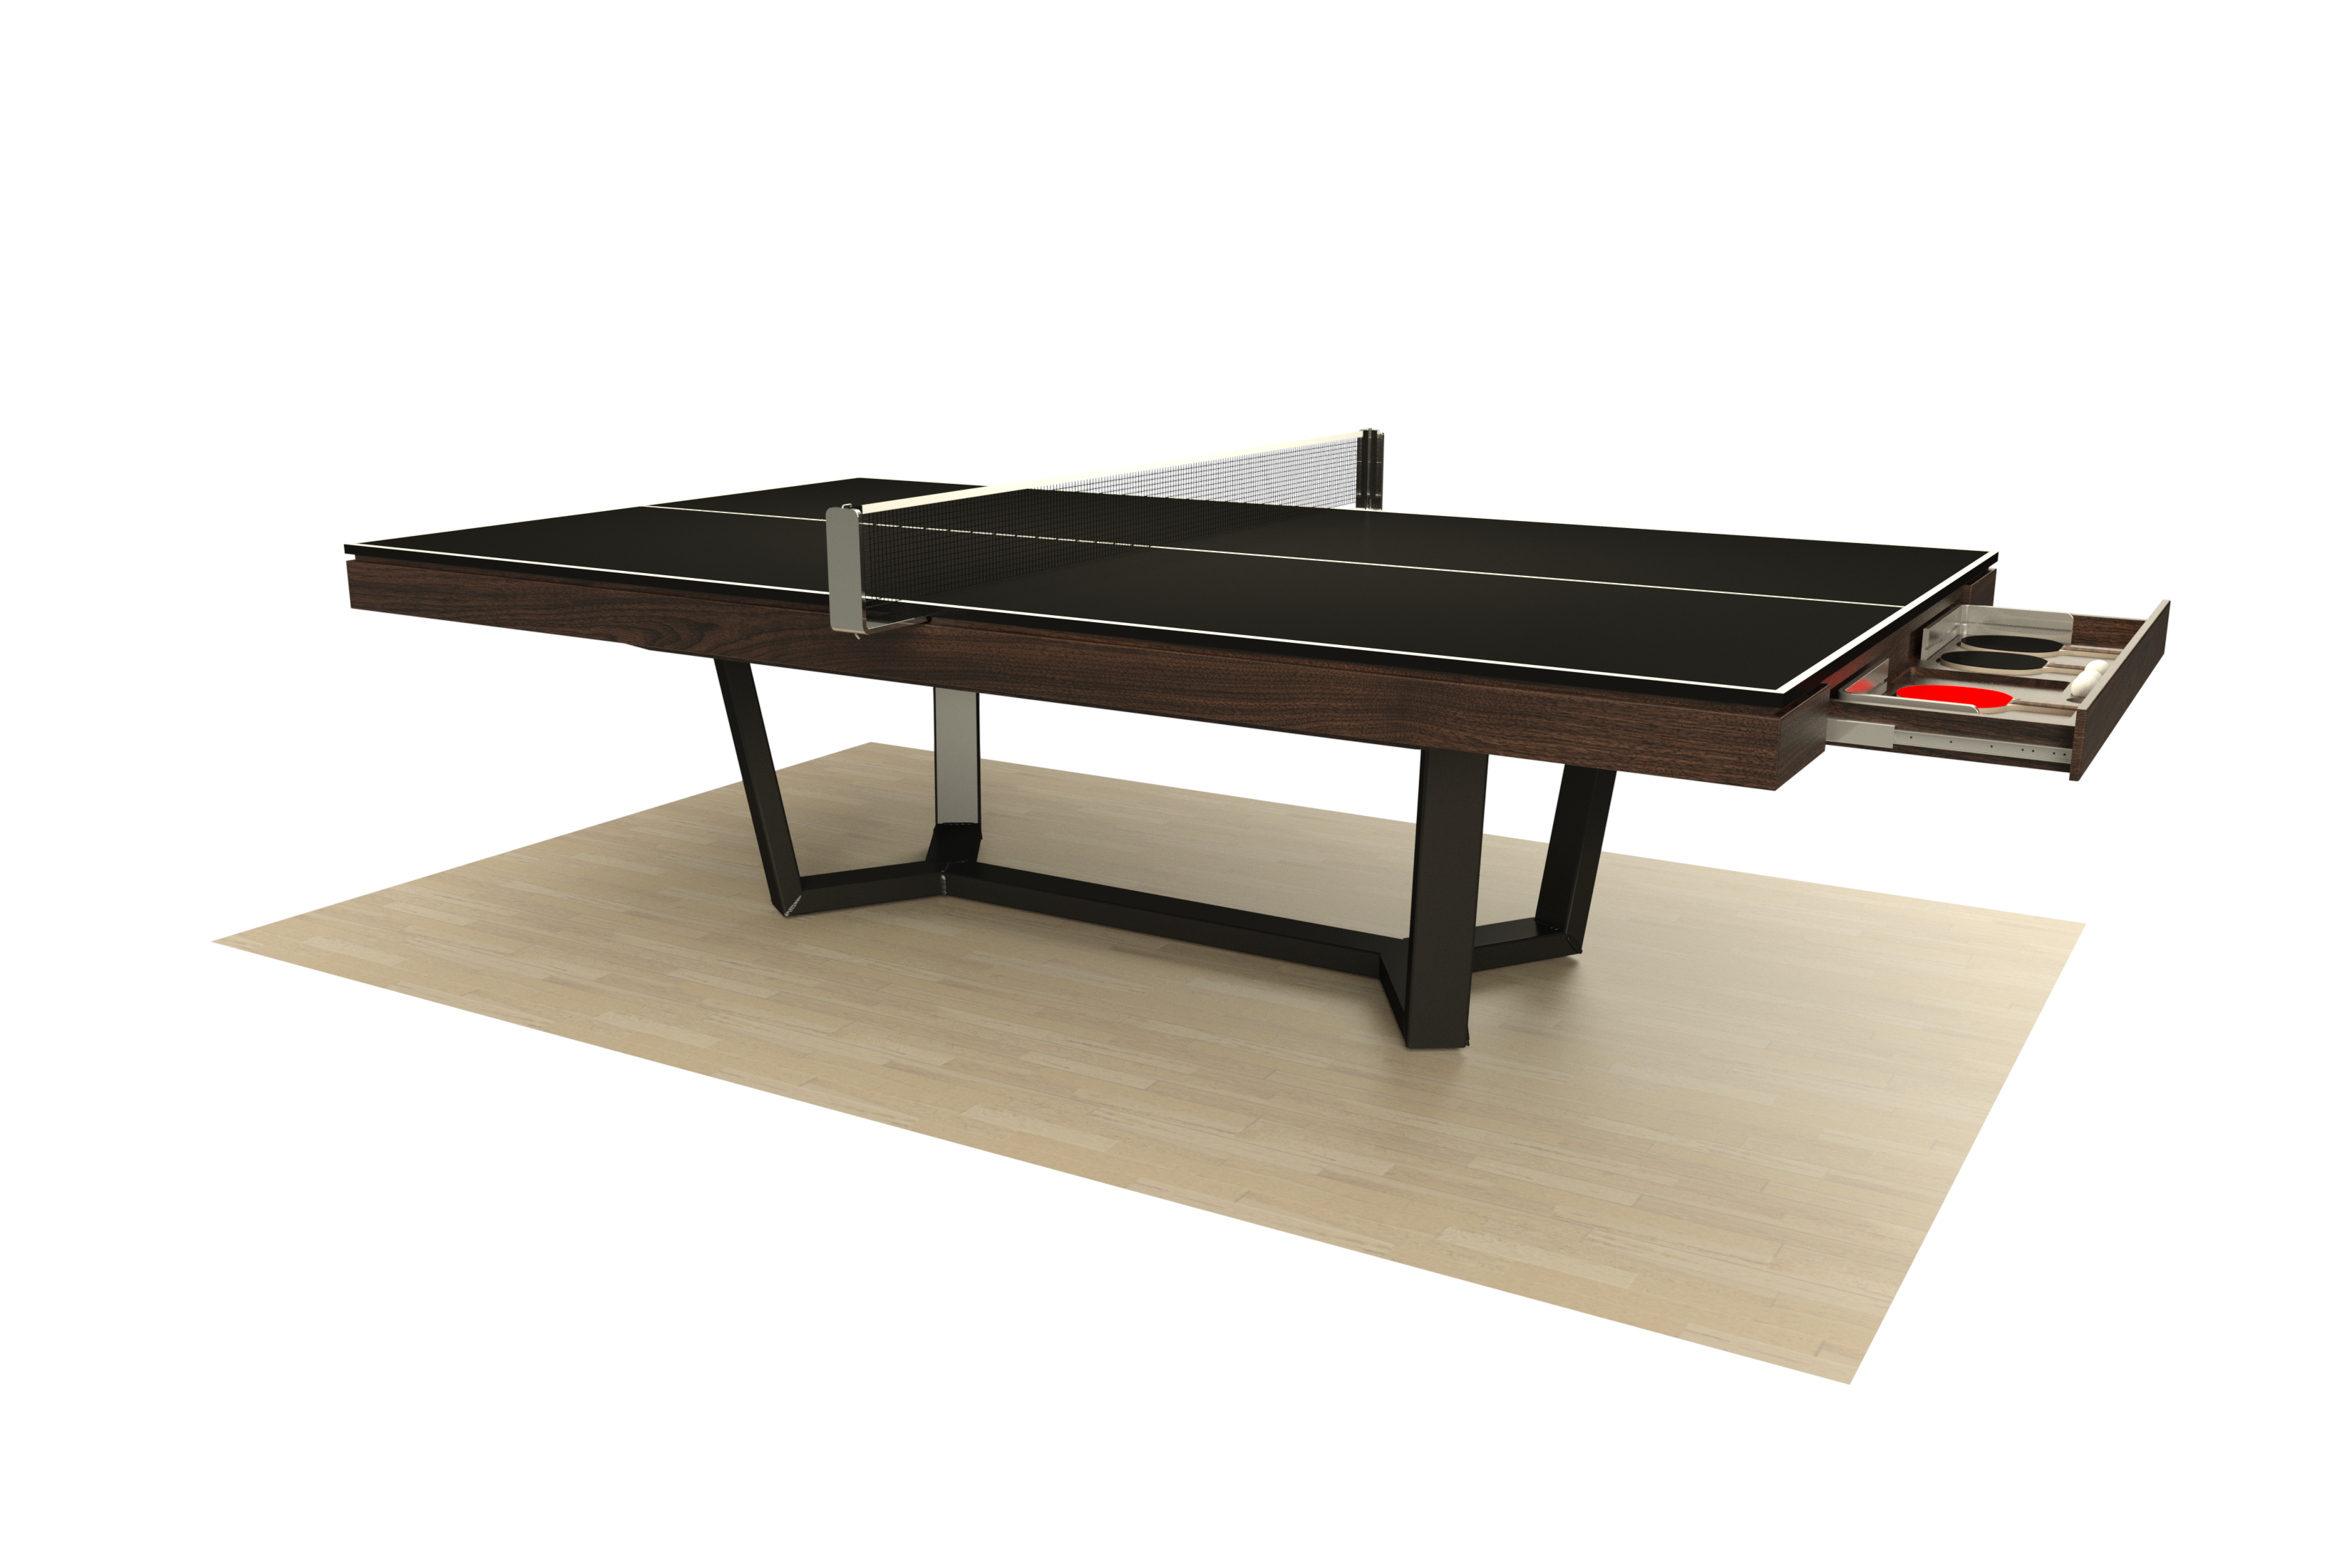 ONYX PING PONG TABLE